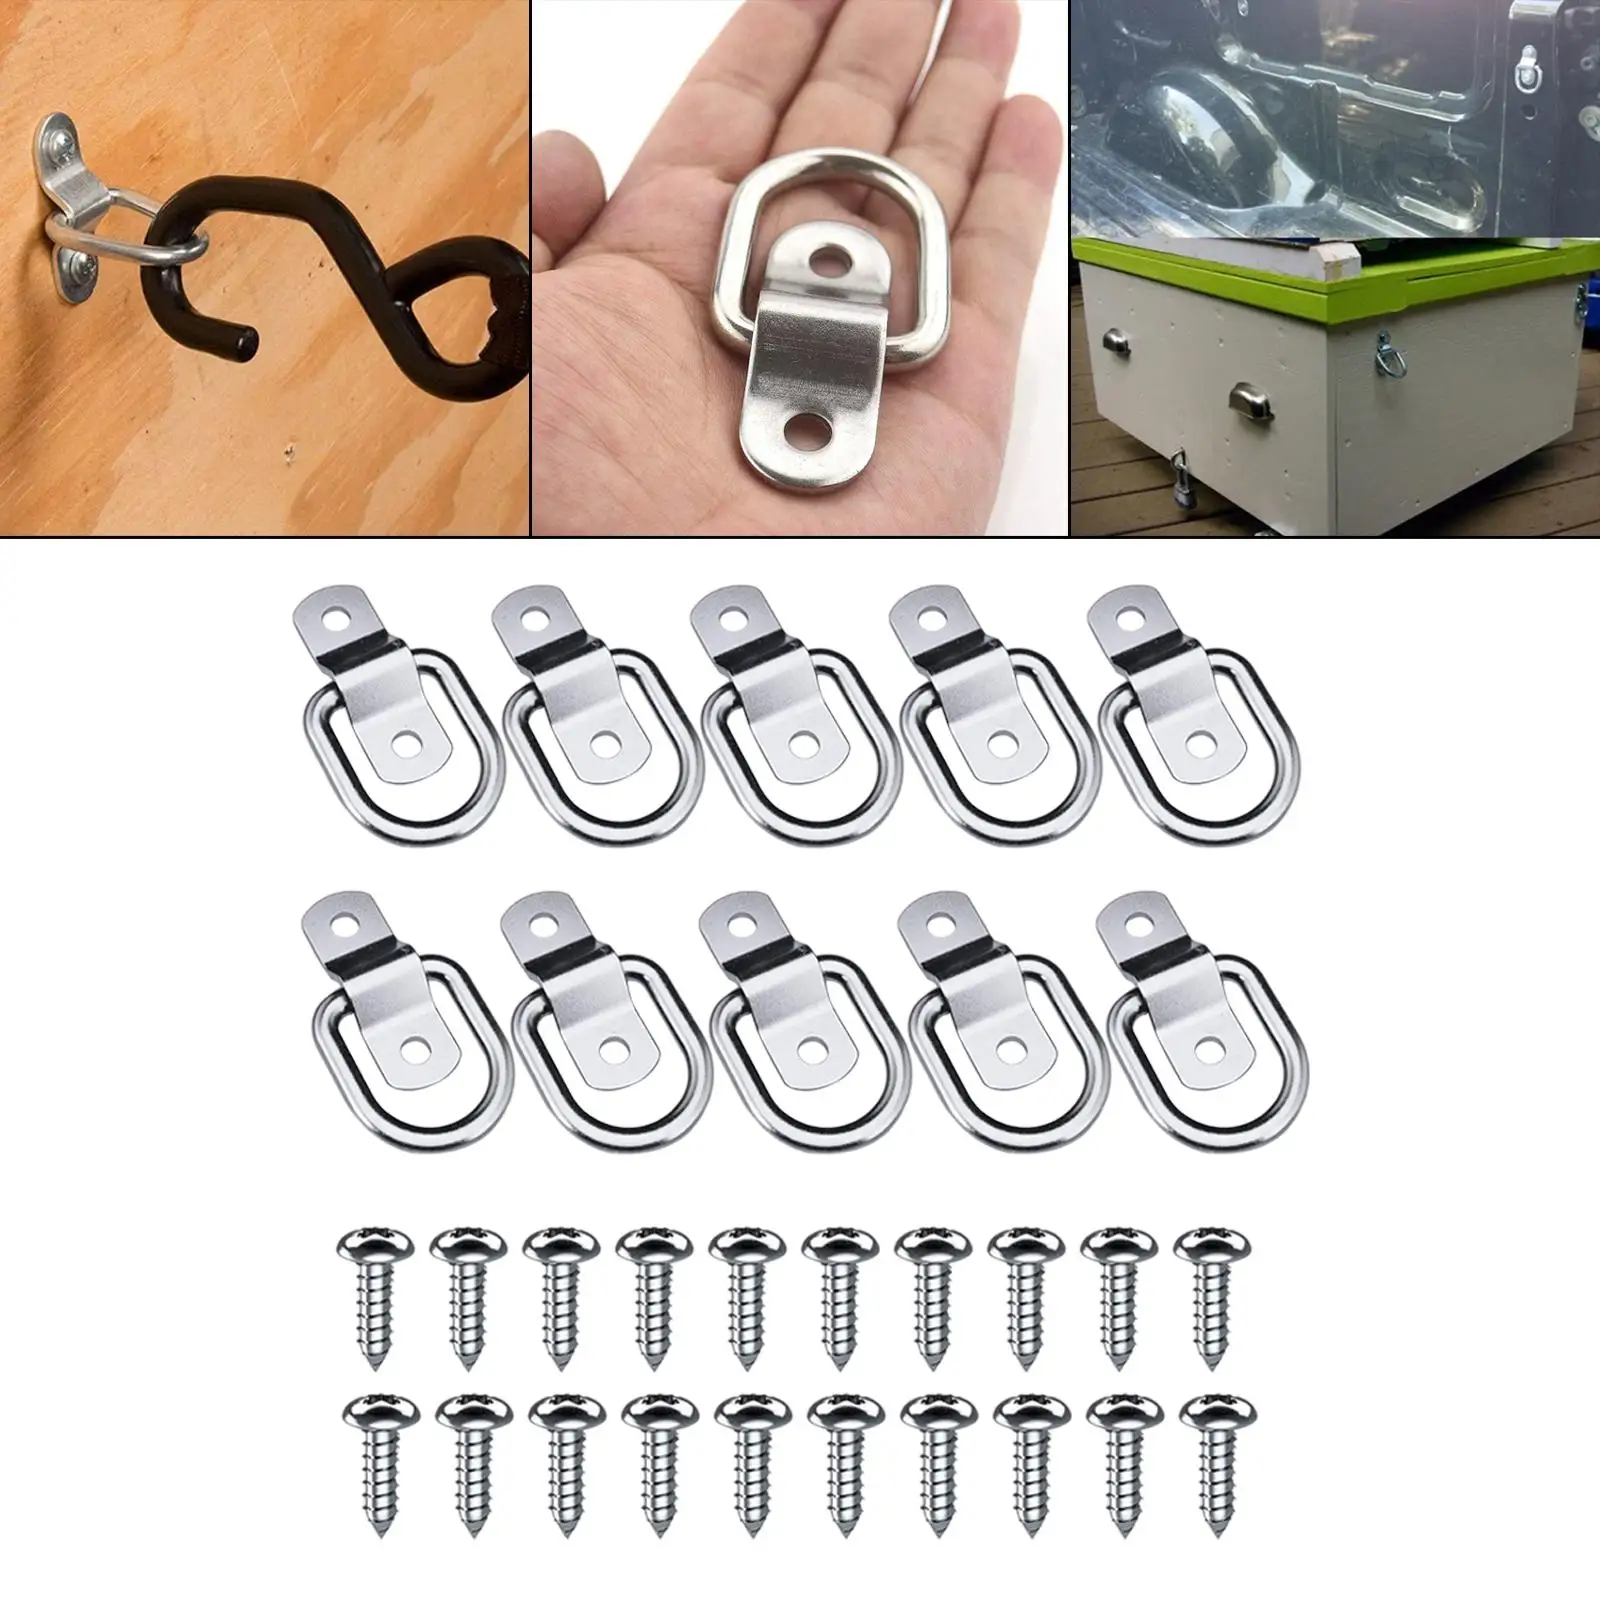 10x Stainless Steel D Rings with Screws Surface Mounting Lashing Rings Trailer Anchors Tie Downs for RV Trucks Boats Canoe ATV